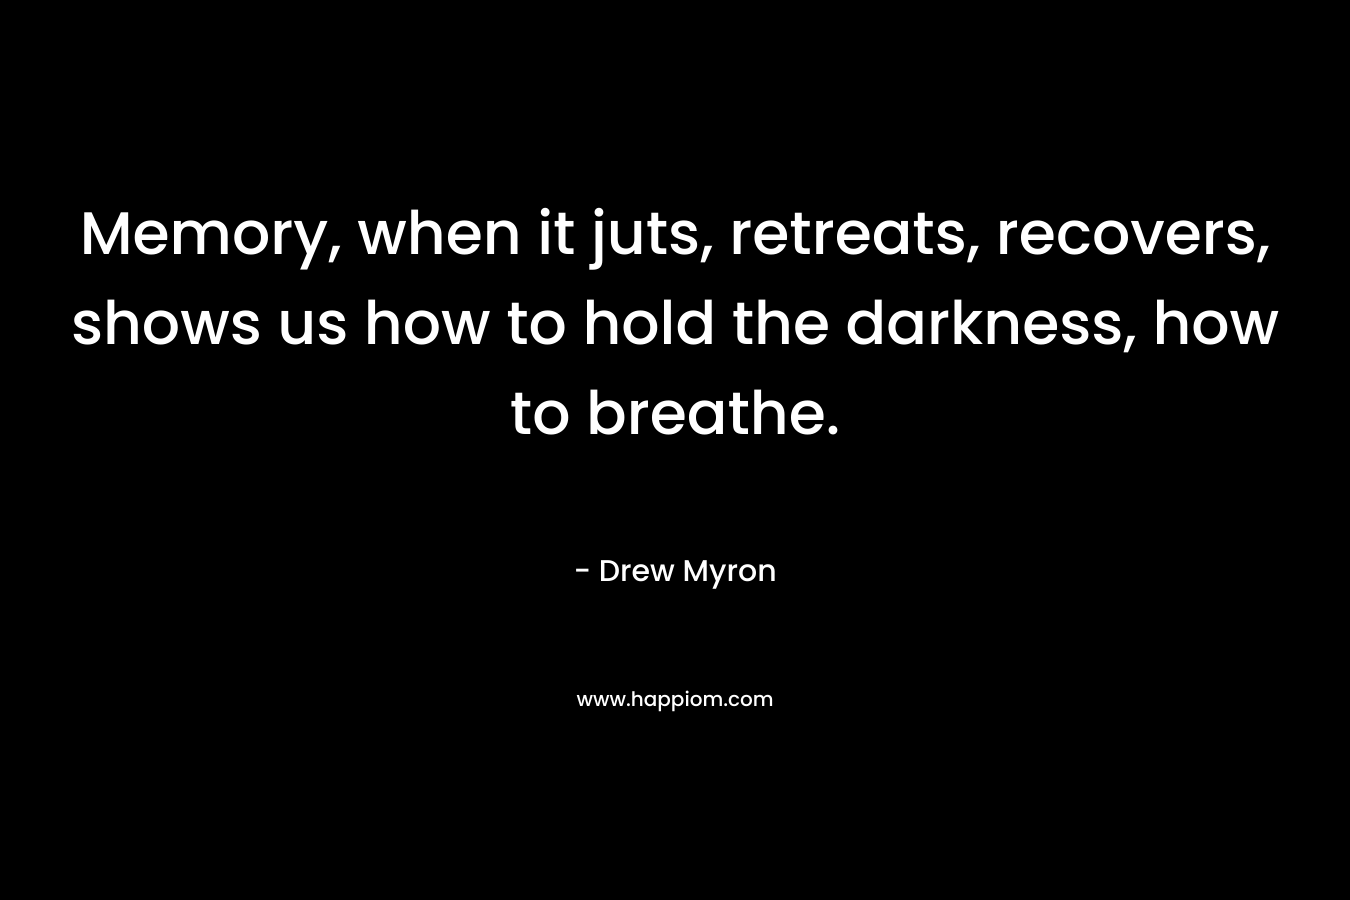 Memory, when it juts, retreats, recovers, shows us how to hold the darkness, how to breathe.